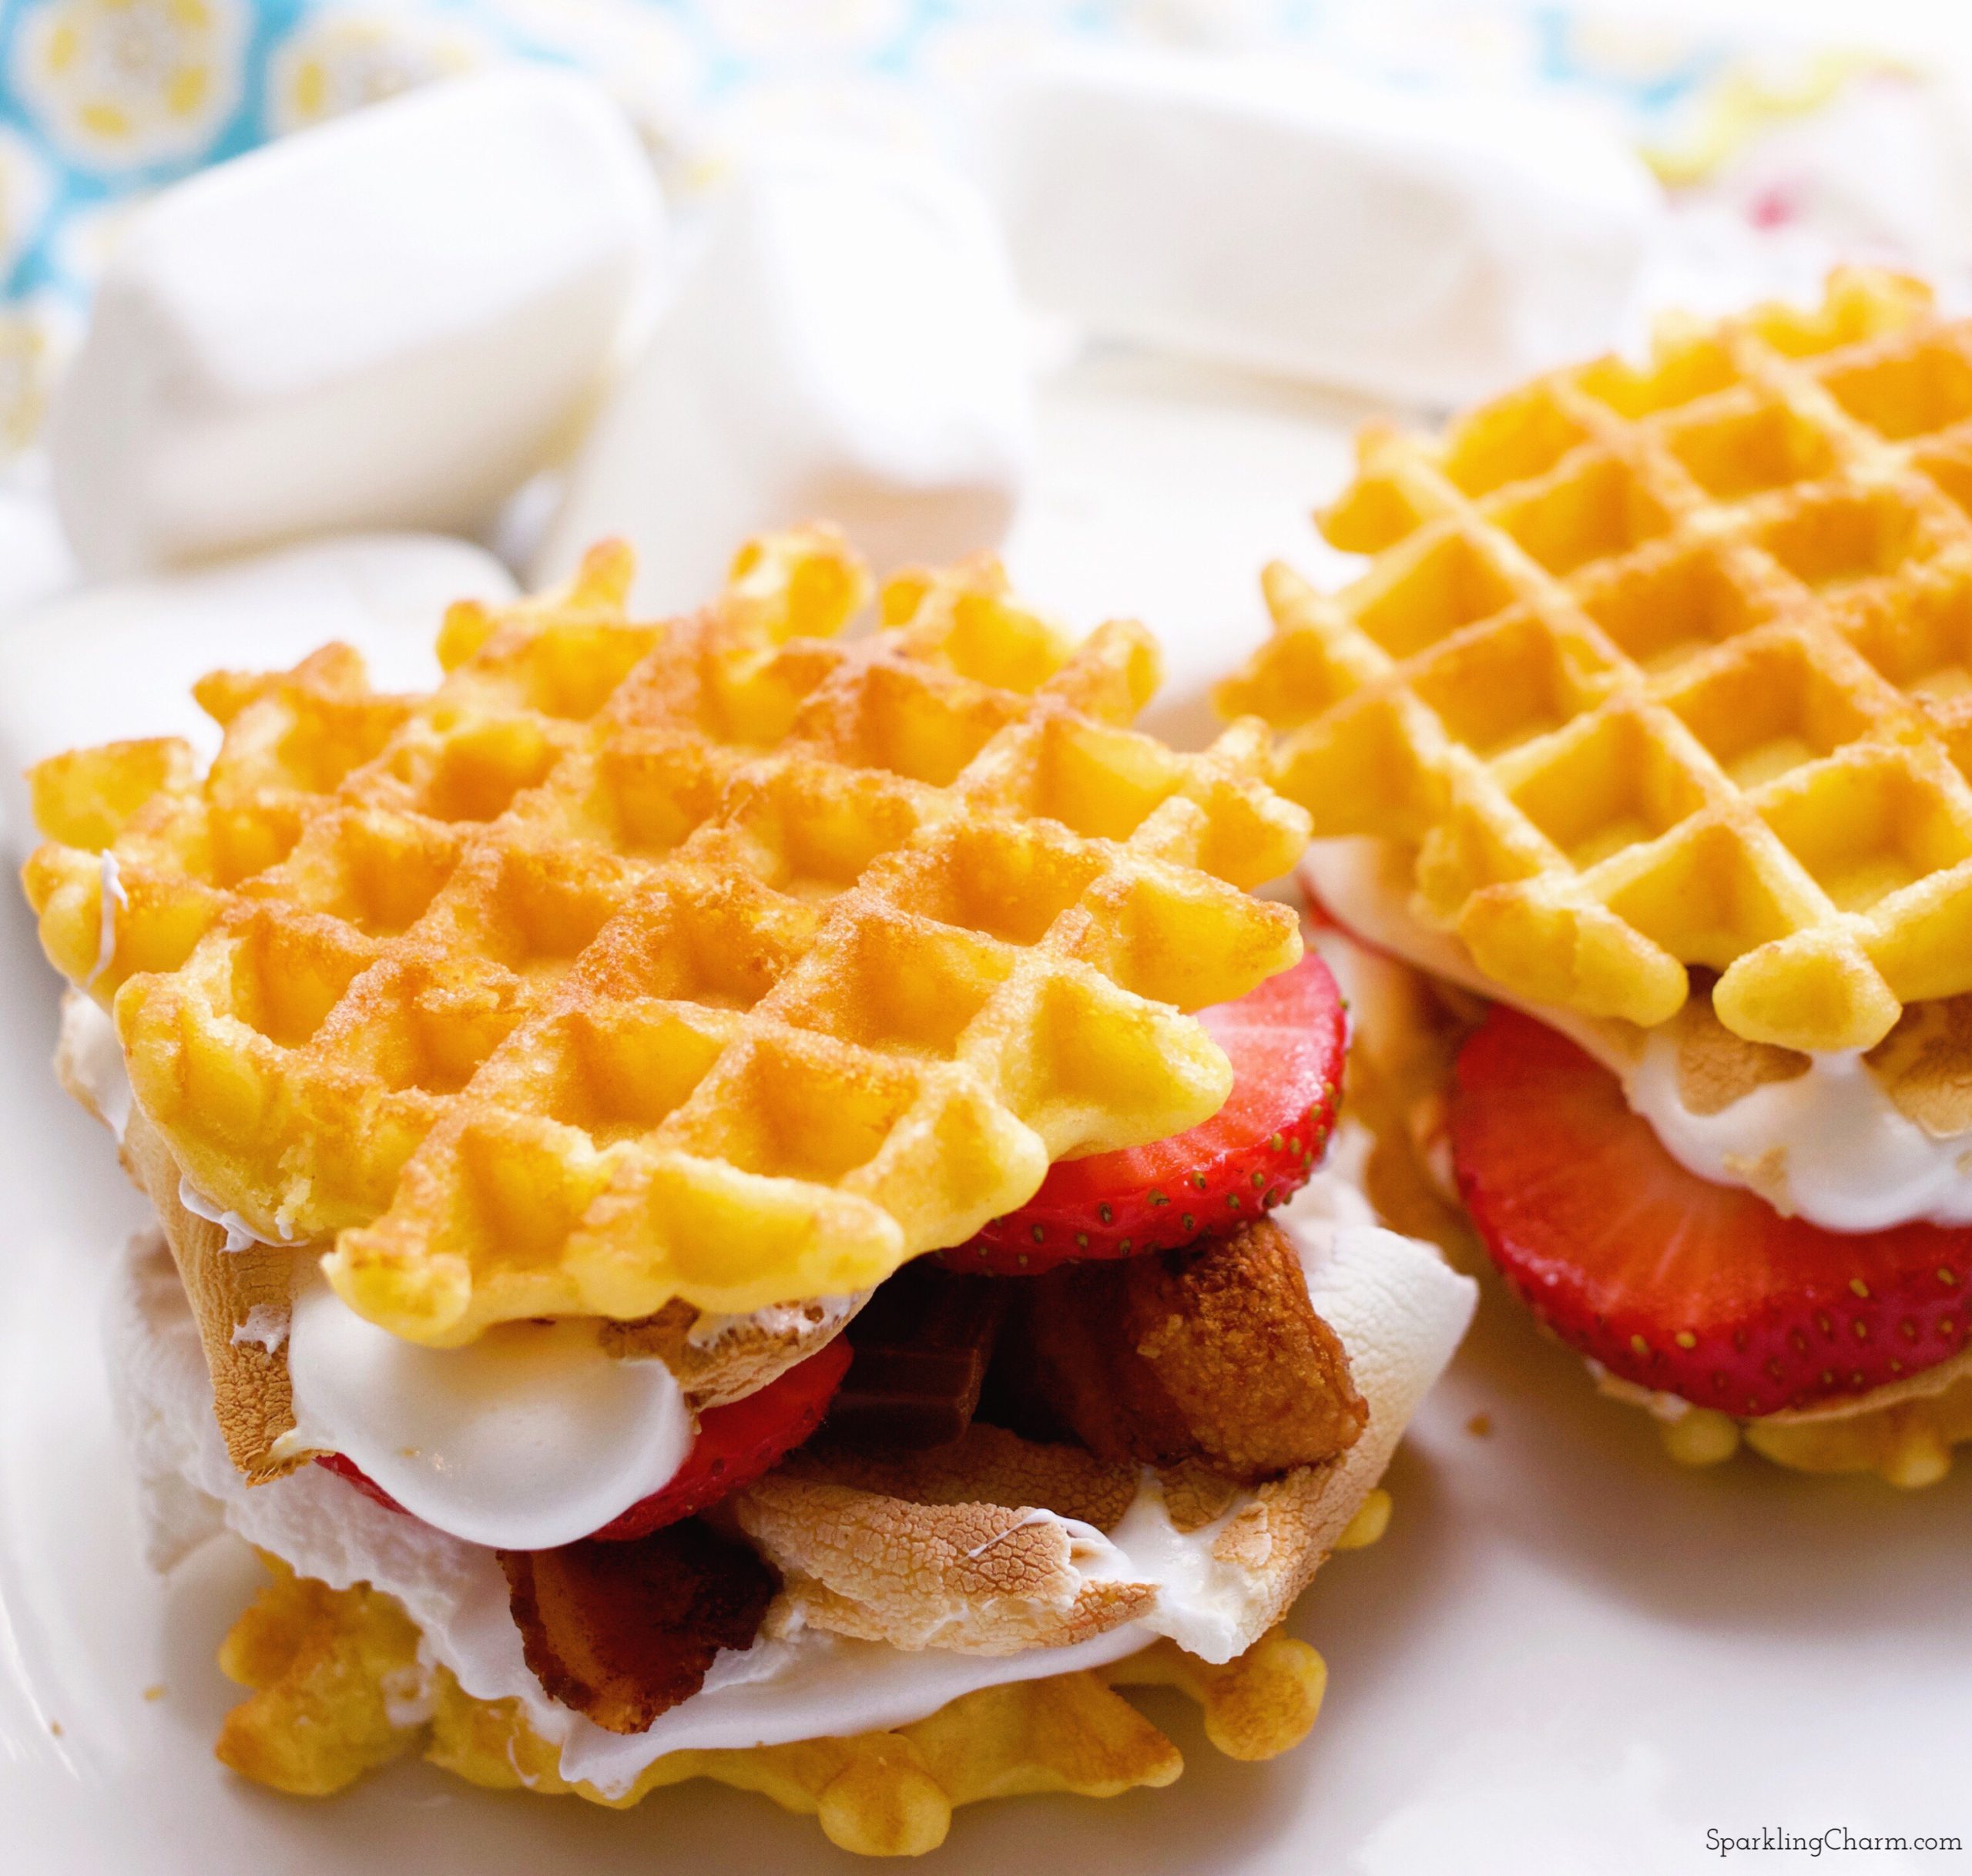 How To Make A Belgian Waffle Strawberry & Bacon S’mores Sandwich